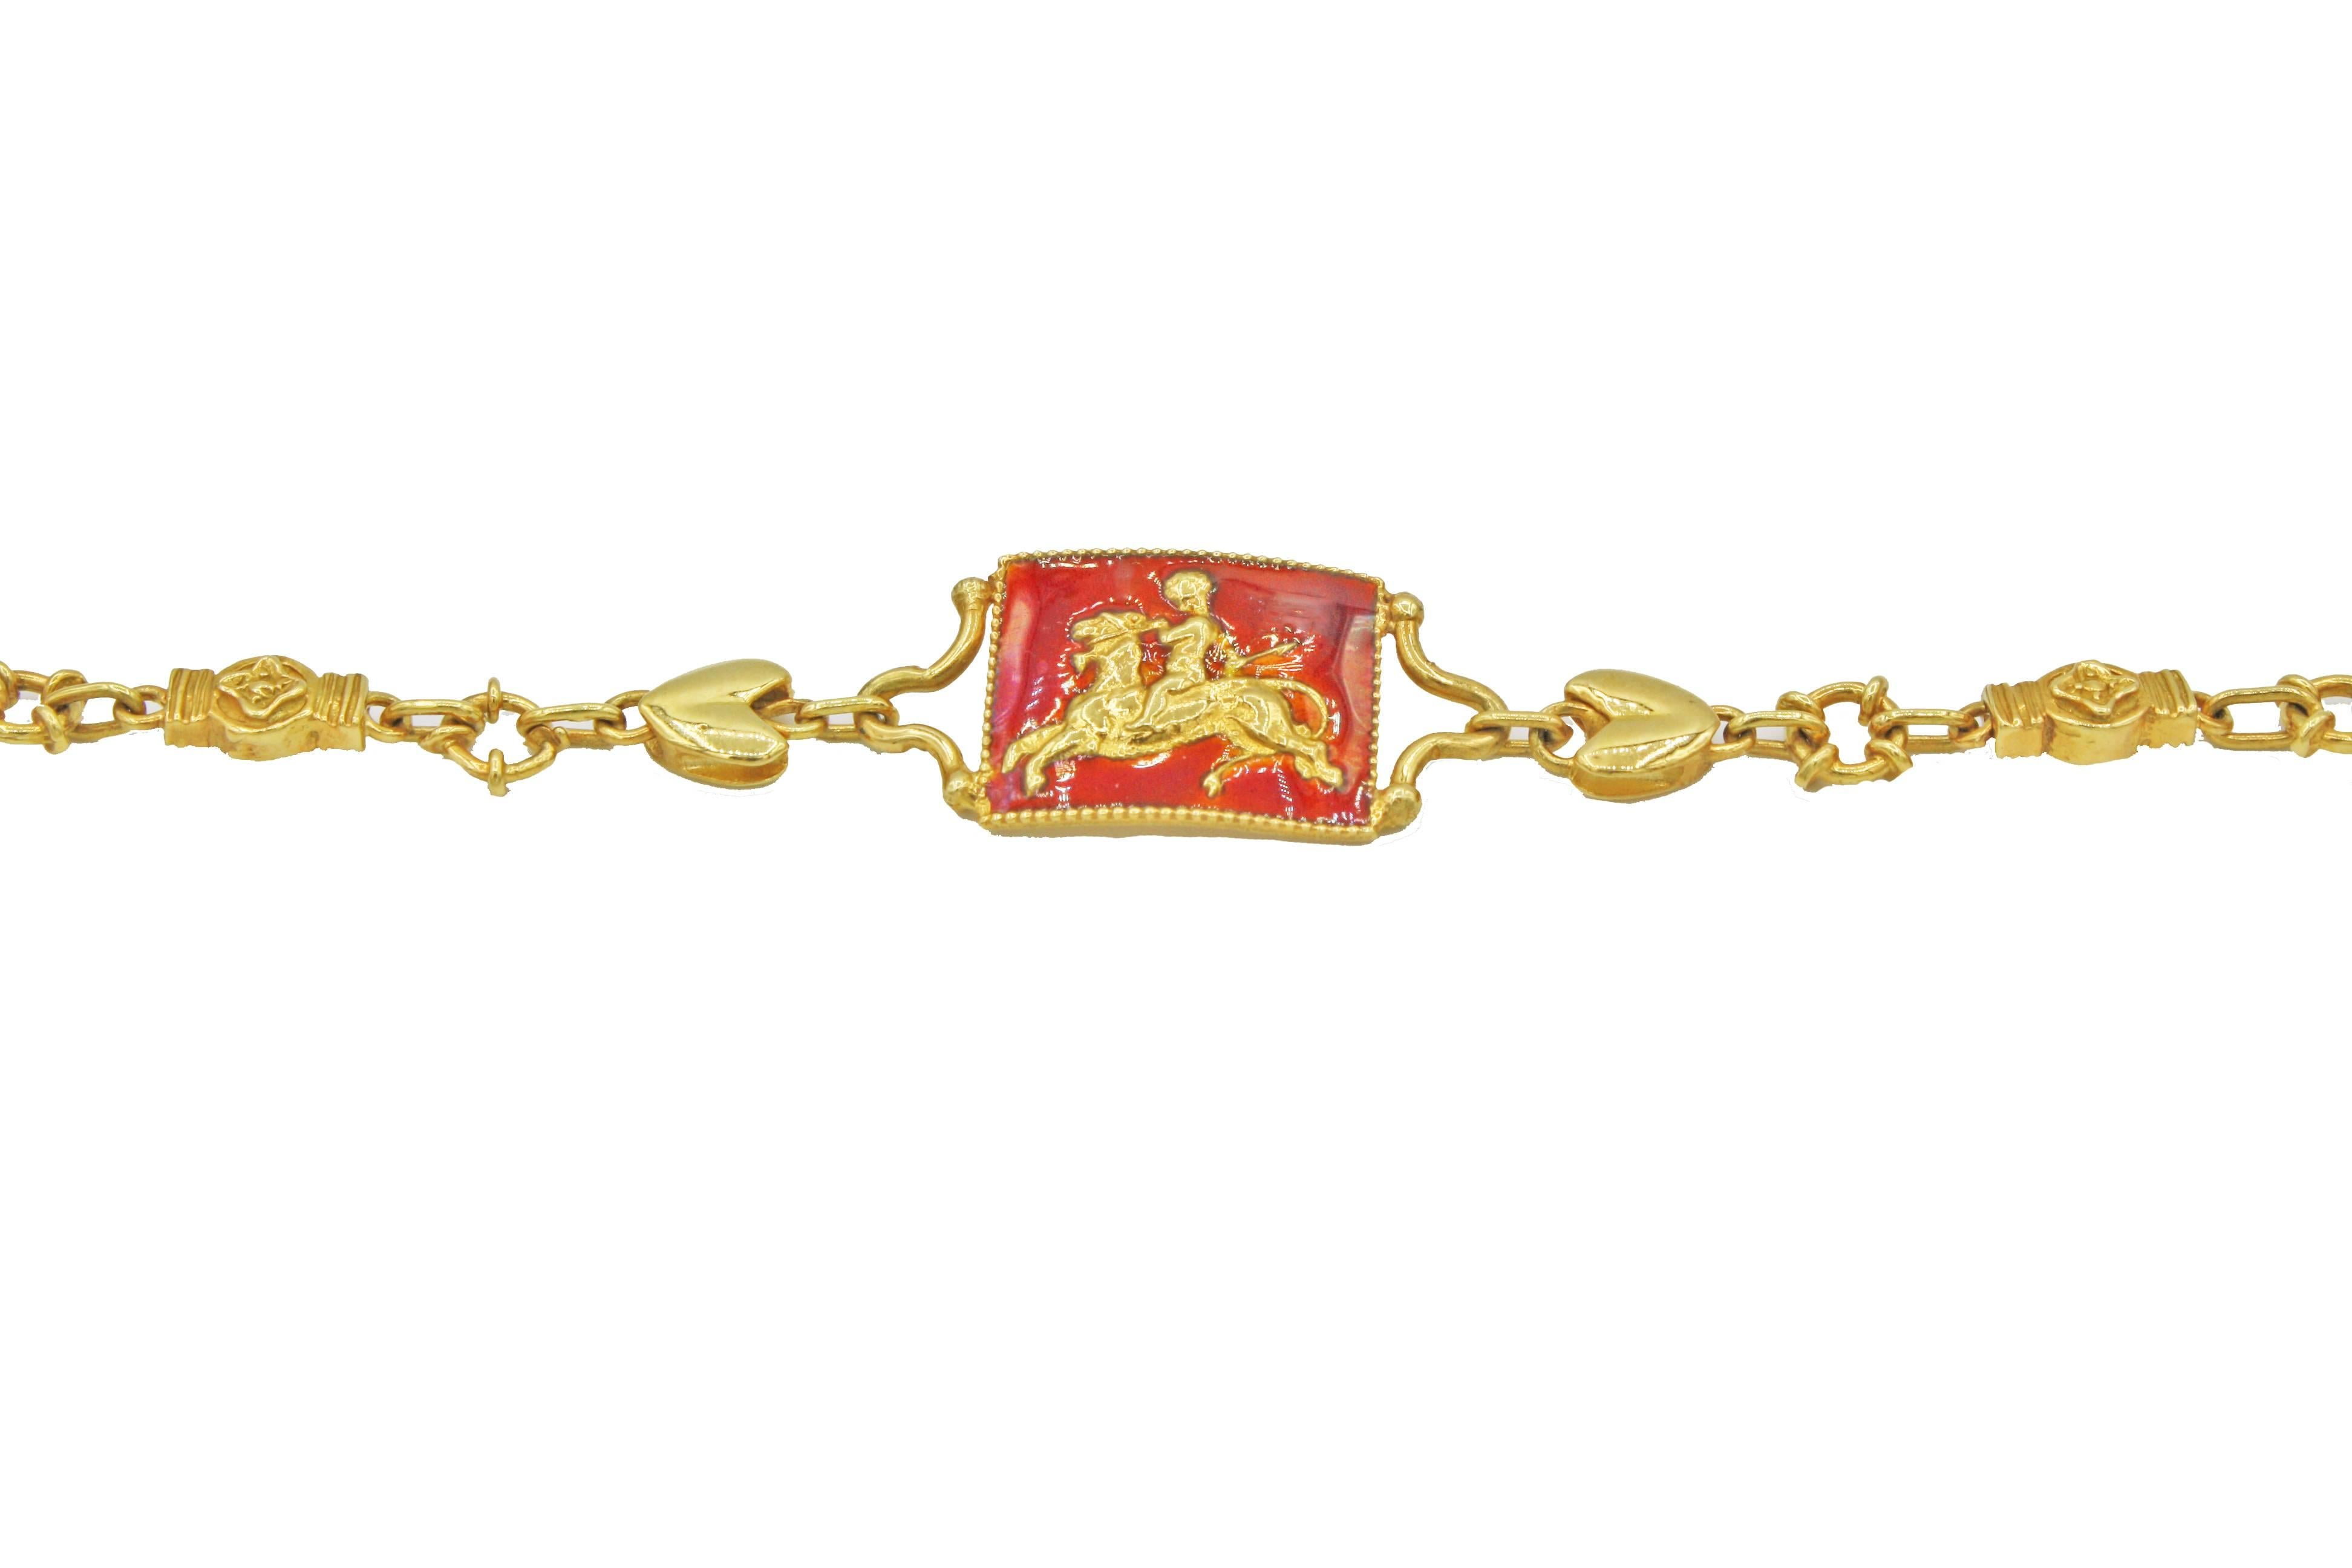 This 18 kt gold enamel bracelet is from Renato Cipullo's Romantica Collection.  This lovely bracelet has a variety of elaborate links along with a nymph and lion enamel medallion.